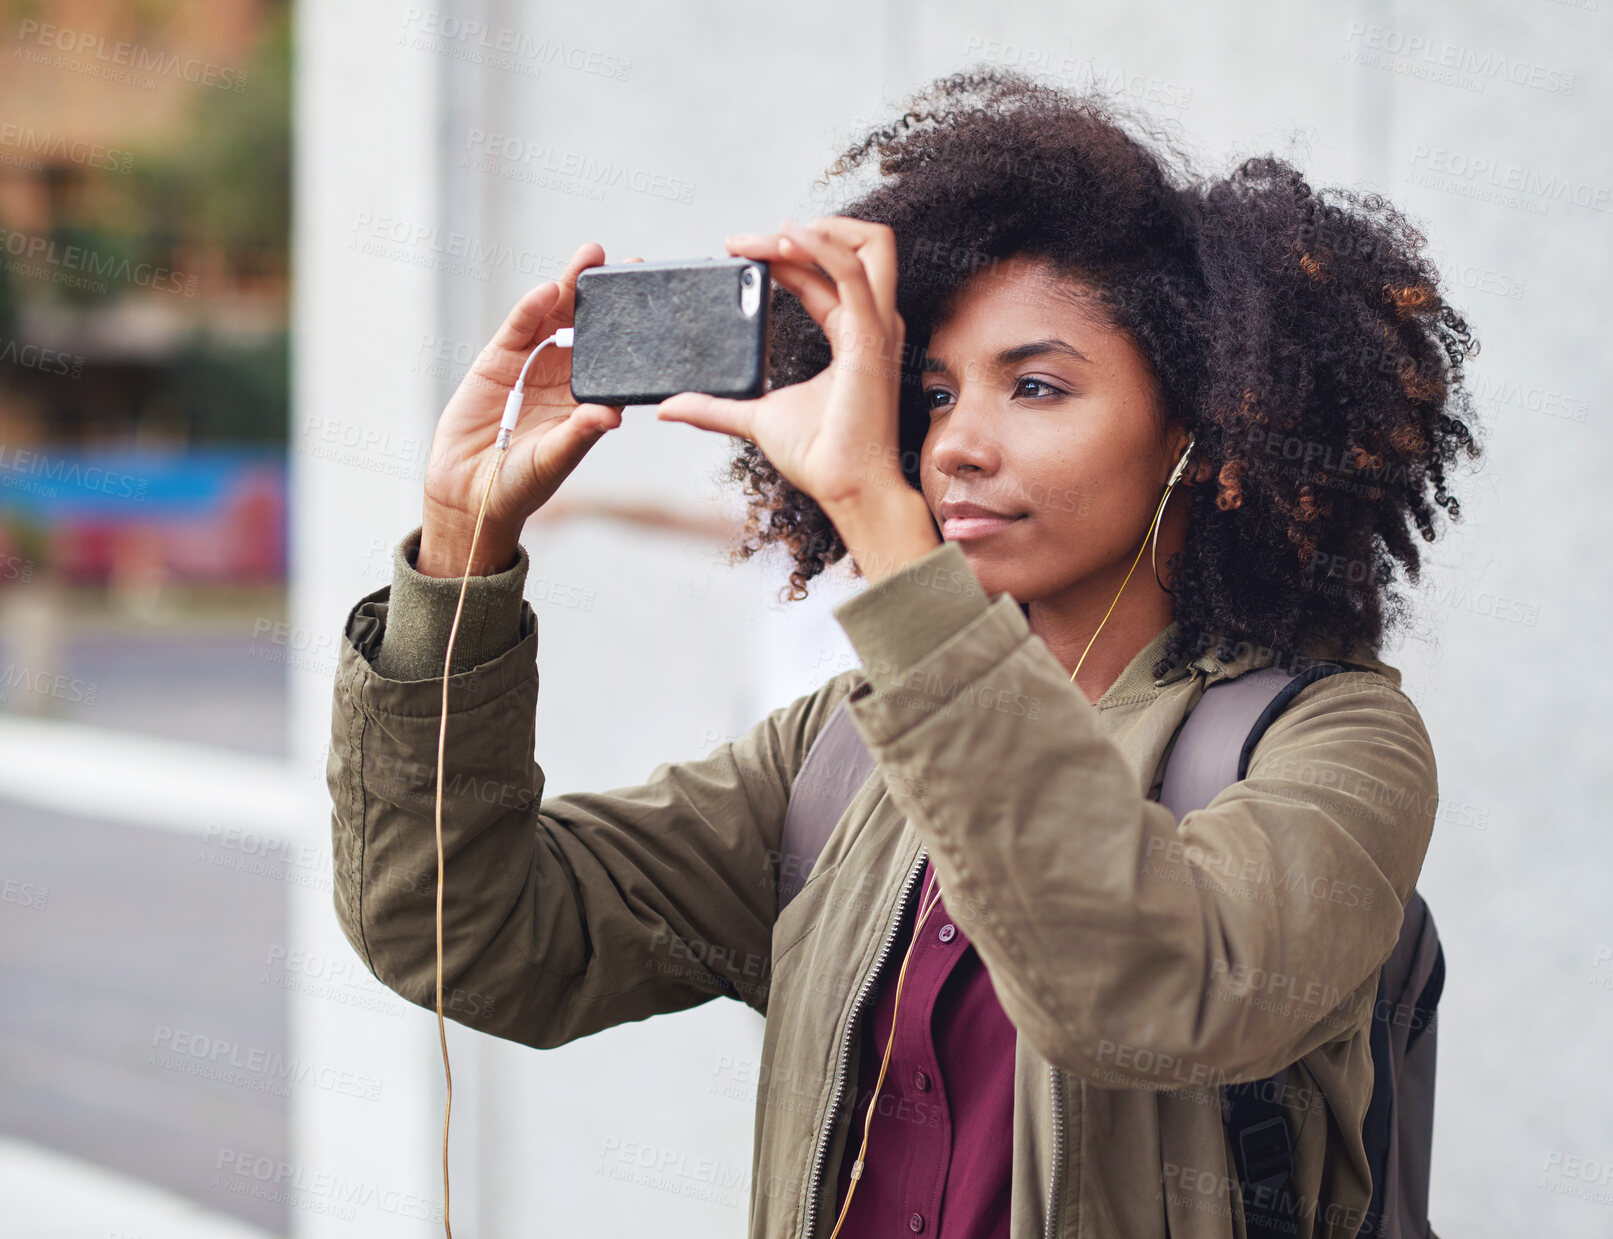 Buy stock photo Music earphones, selfie and black woman in city taking pictures for travel memory outdoors. Profile picture, street and female student taking photo for social media post while streaming radio podcast